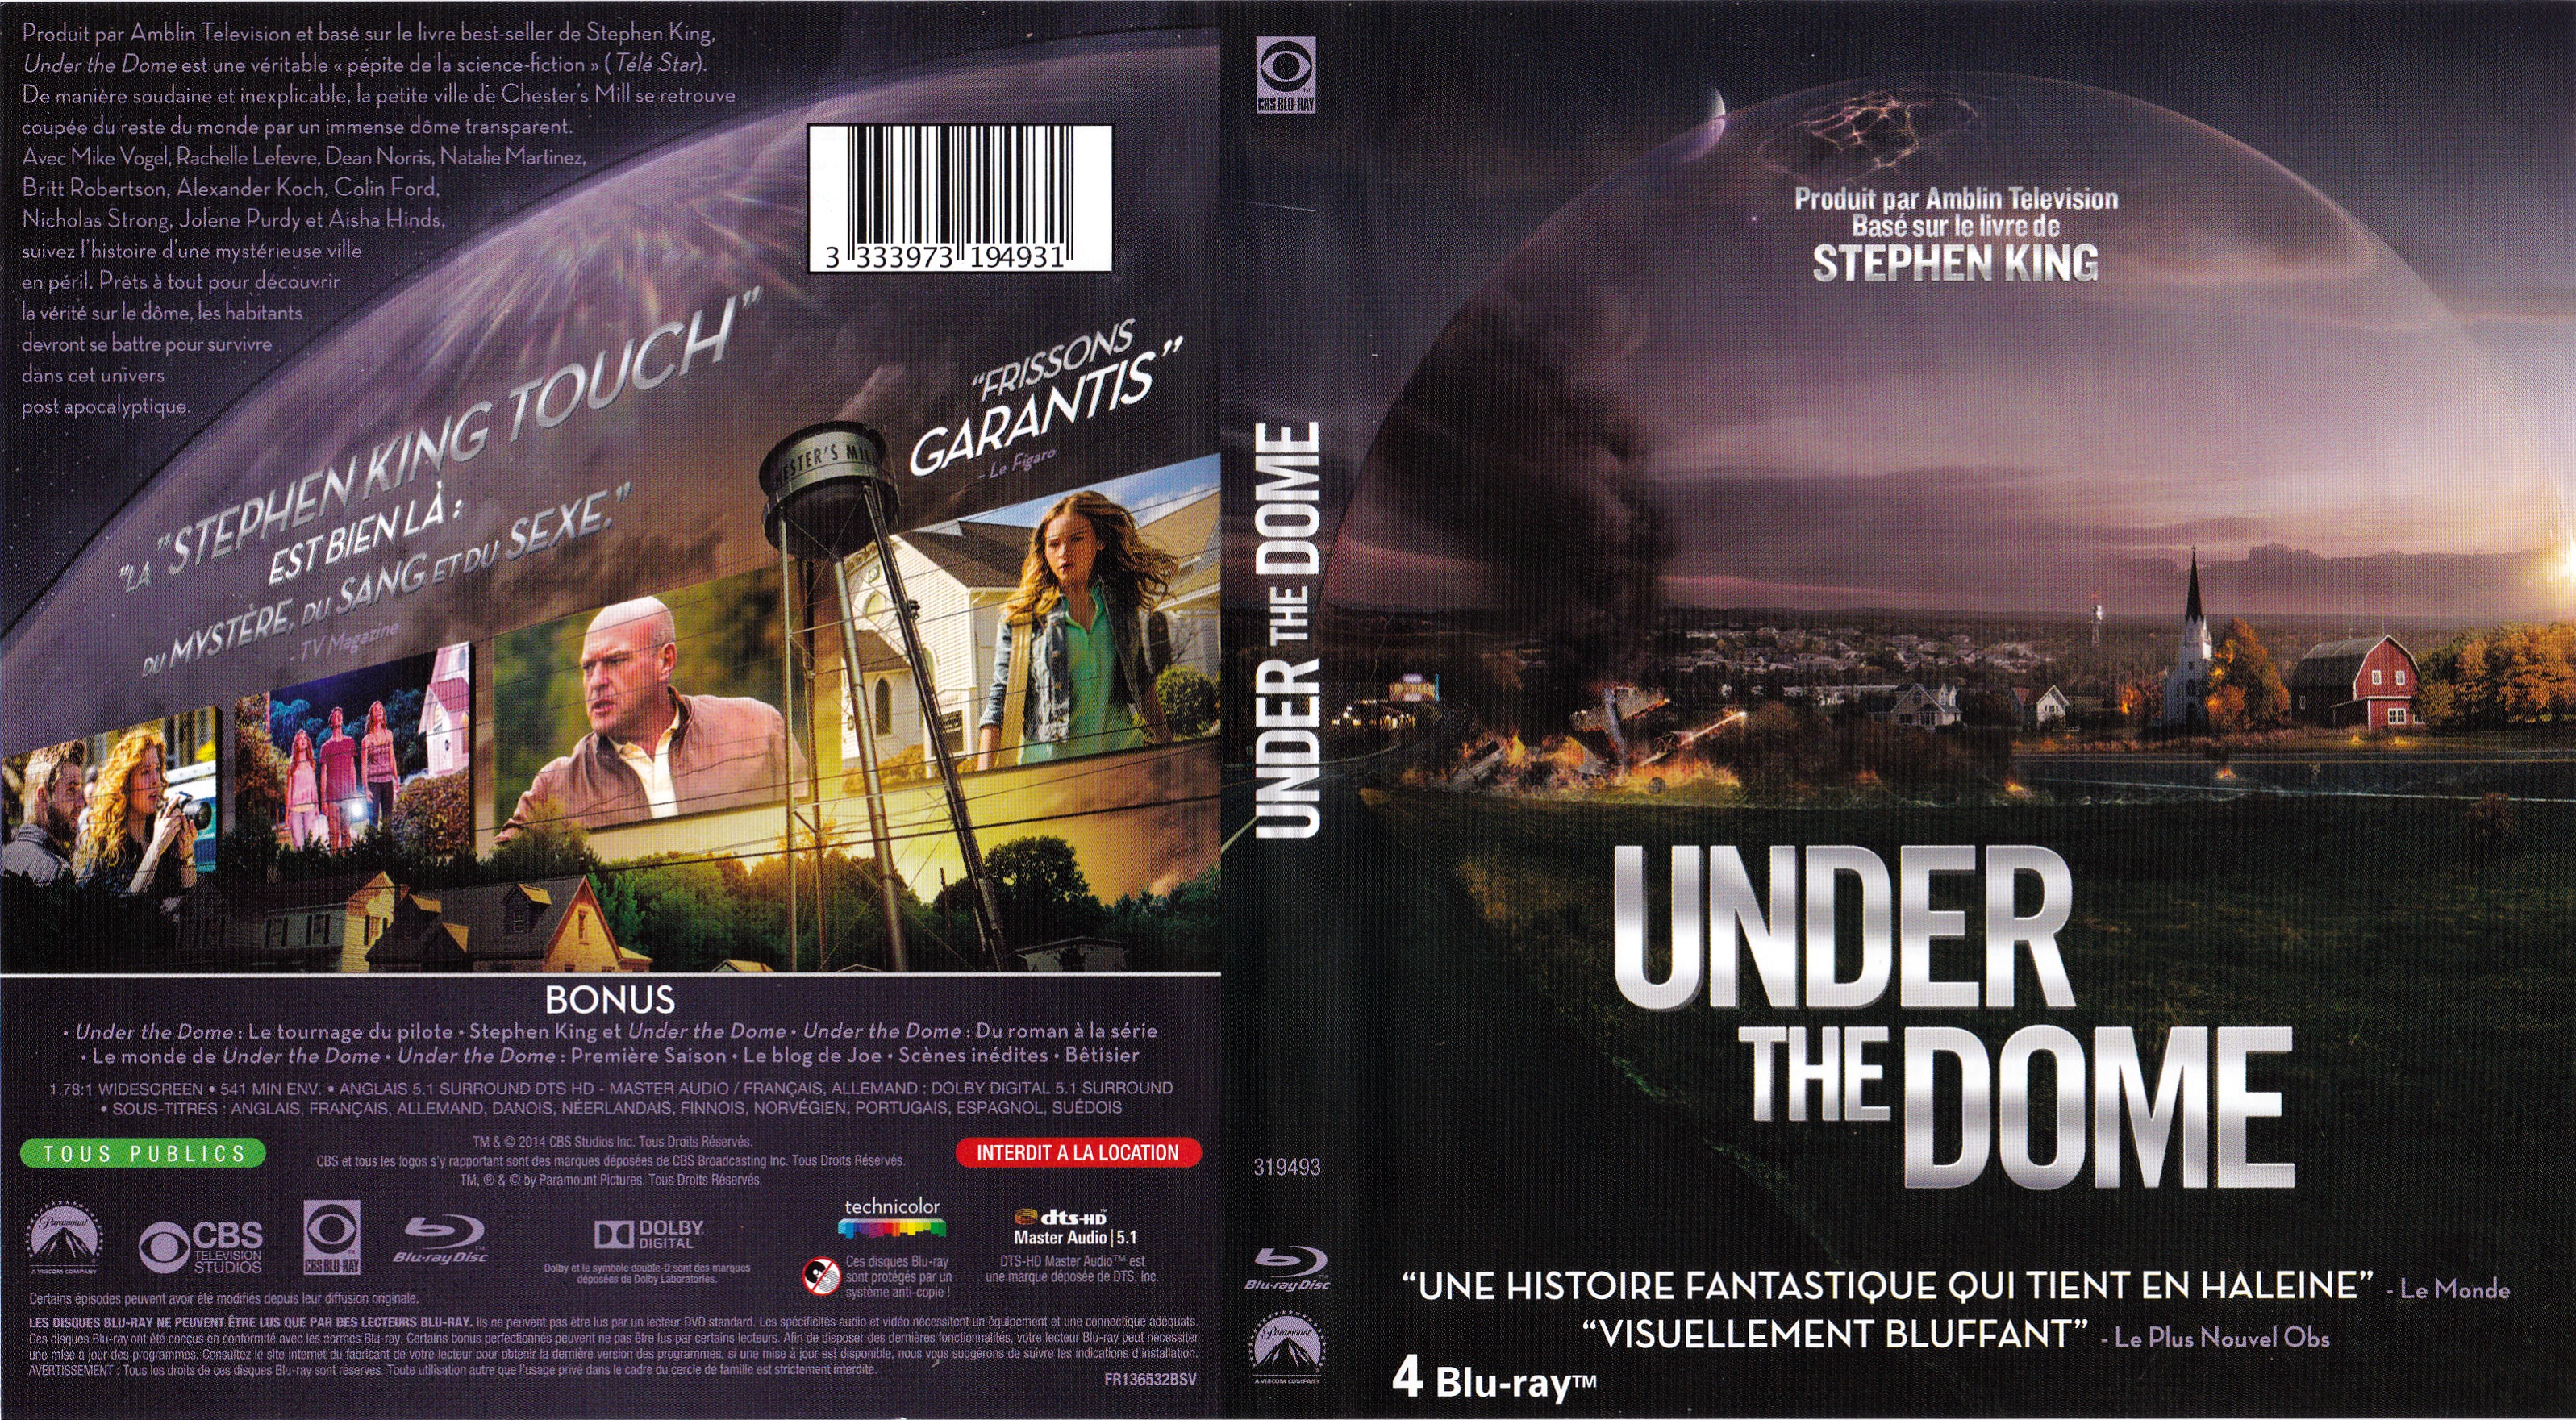 Jaquette DVD Under the Dome saison 1 (BLU-RAY)